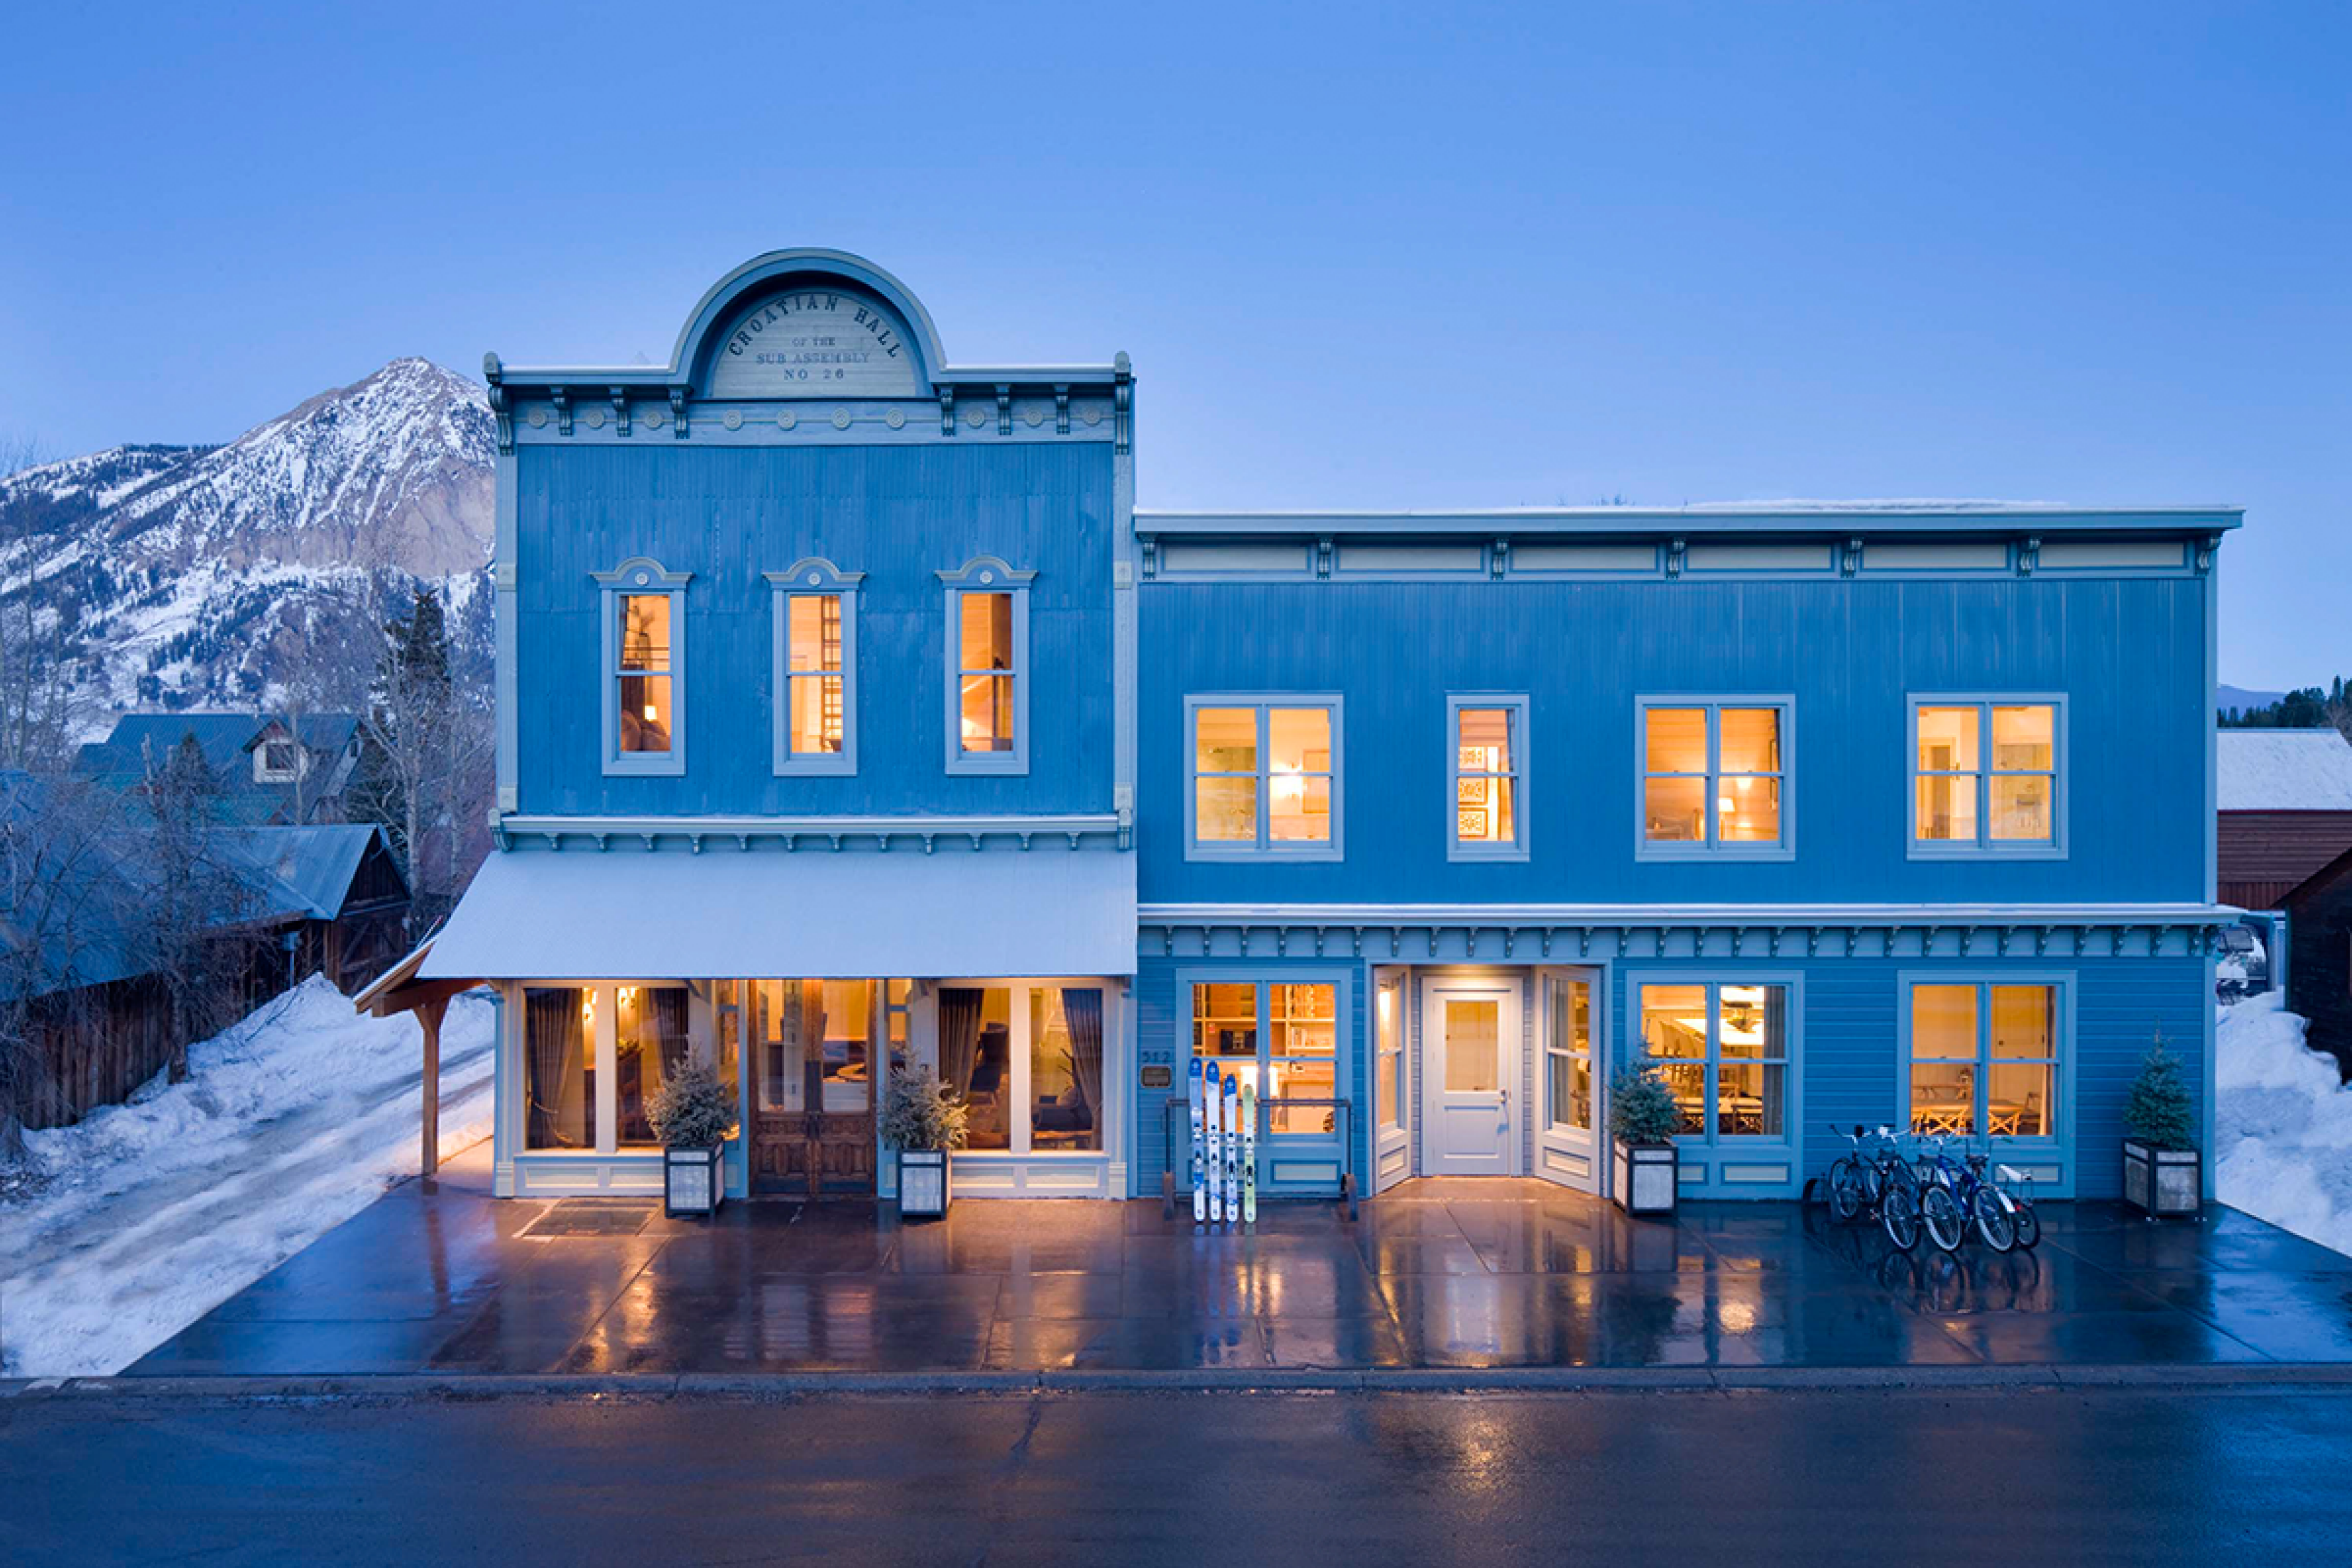 Blue hotel (looks like a Wild West general store) with lights on. It's dusk outside so the lights are glowing